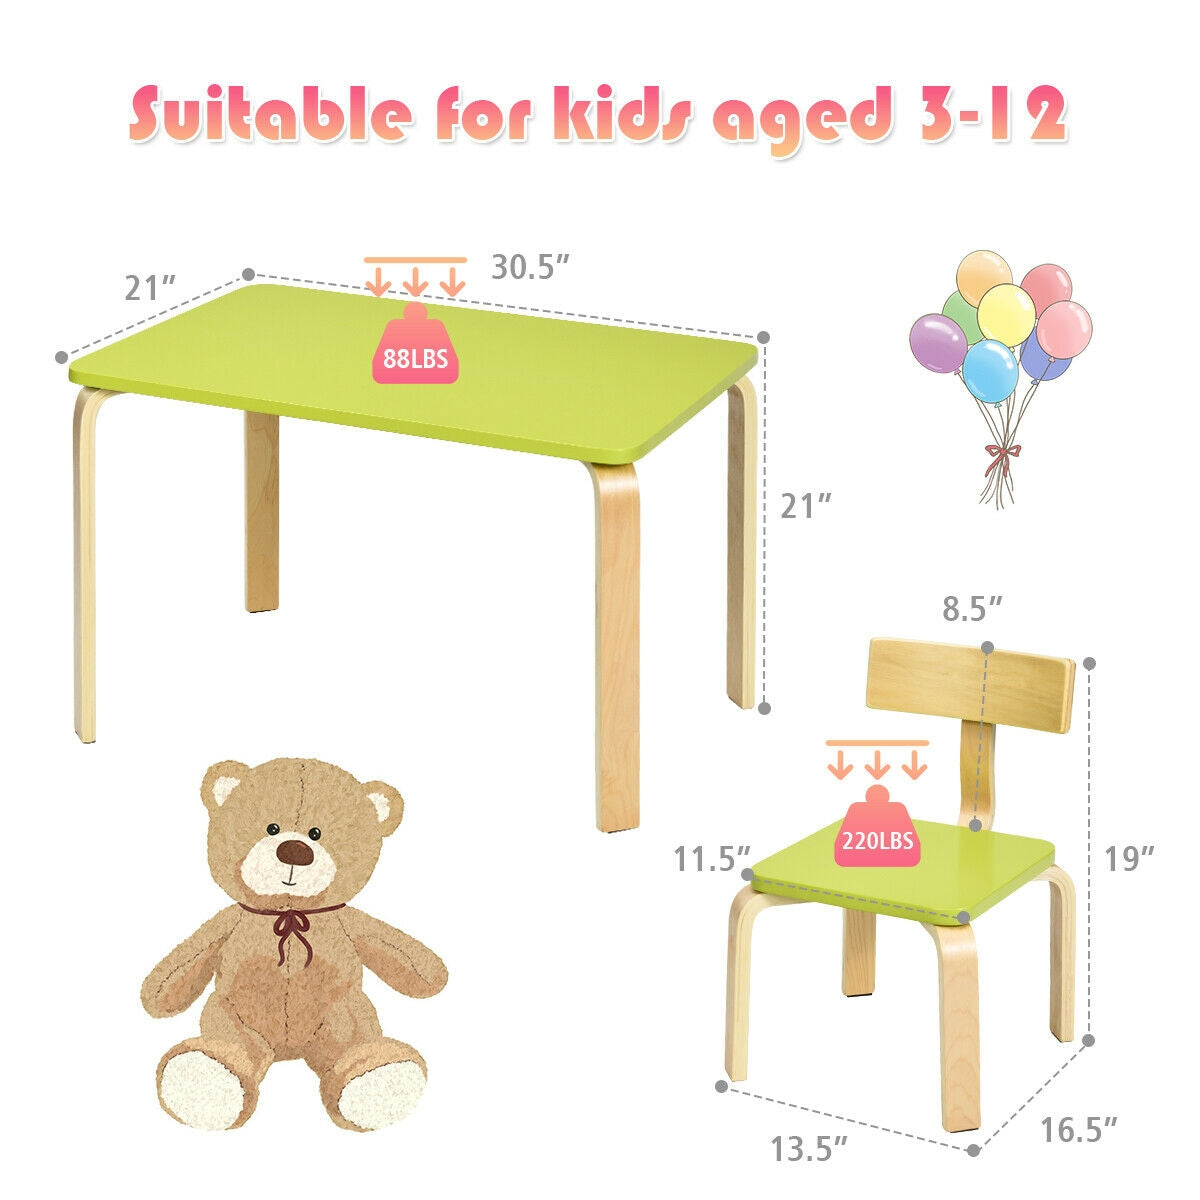 Easy Assembly & Maintenance: With detailed instructions and all hardware included, assembling this set is a breeze. The smooth surface ensures easy cleaning, allowing you to wipe away stains quickly, making it worry-free for mealtime, drawing, or studying.